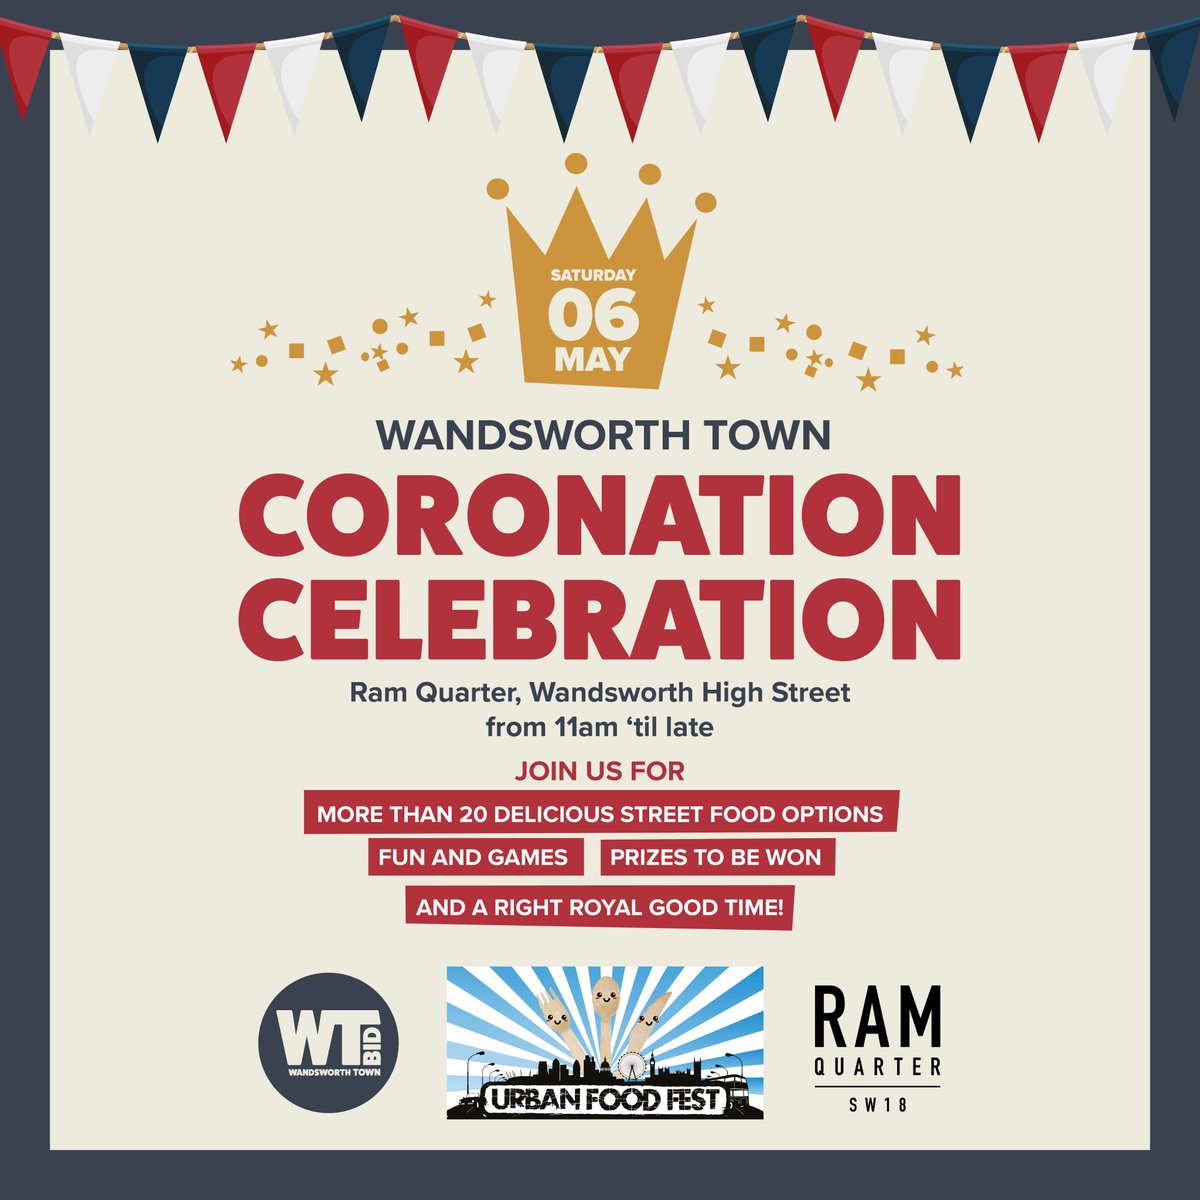 Save the date! Wandsworth Town's #Coronation Celebration comes to @RamQuarter on Sat 6 May. Join us from 11am for a day of incredible street food, themed décor, fun and games for all ages, and much, much more!